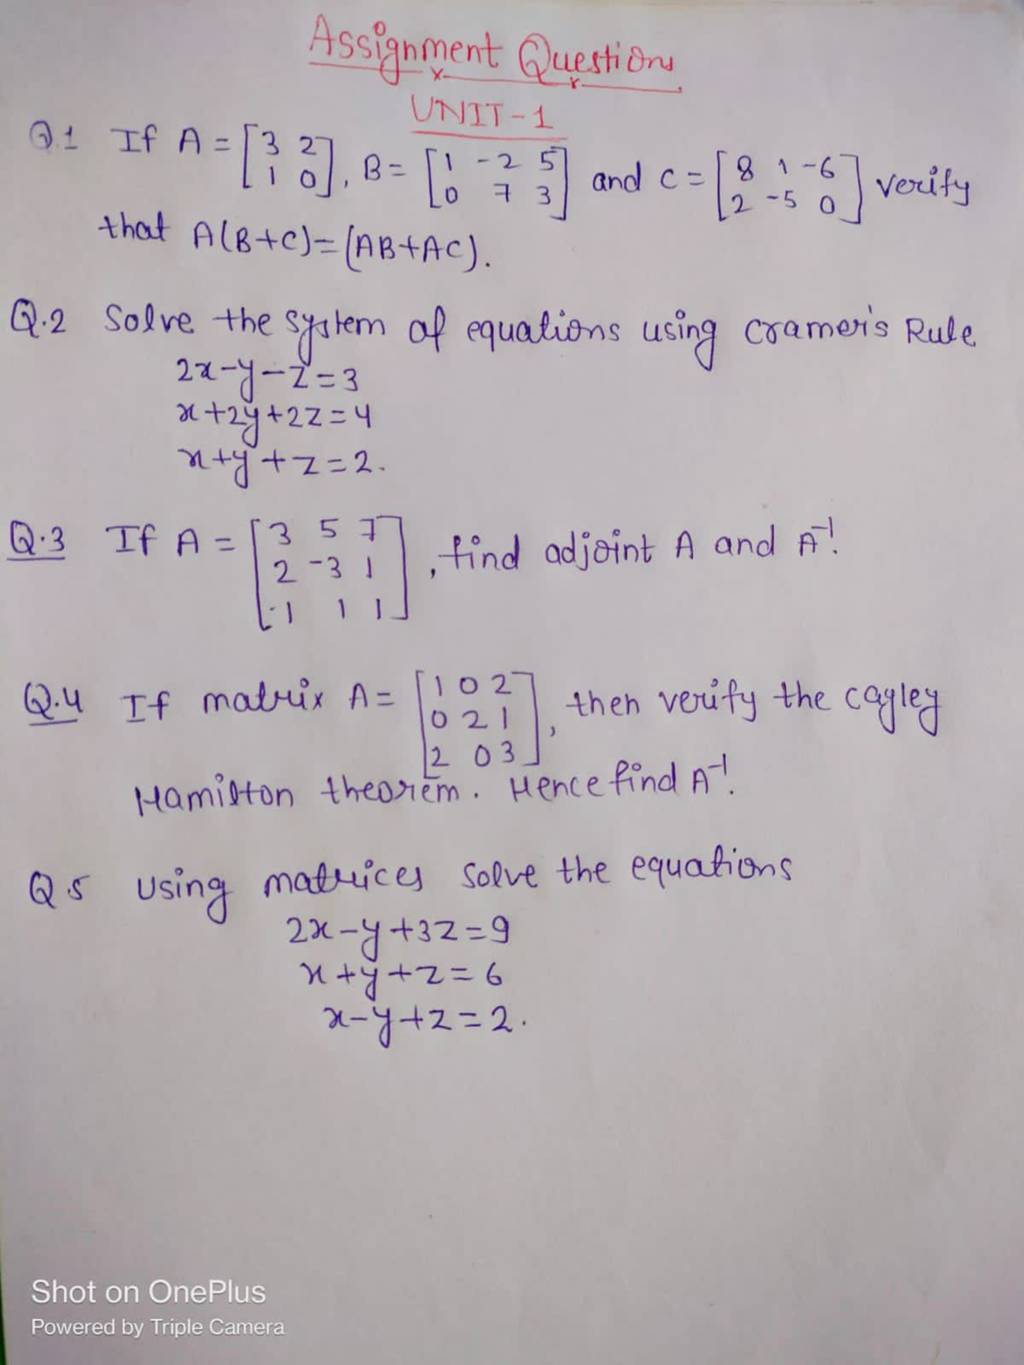 Assignment Questions
Q.1 If A=[31​20​],B=[10​−27​53​] and C=[82​1−5​−6